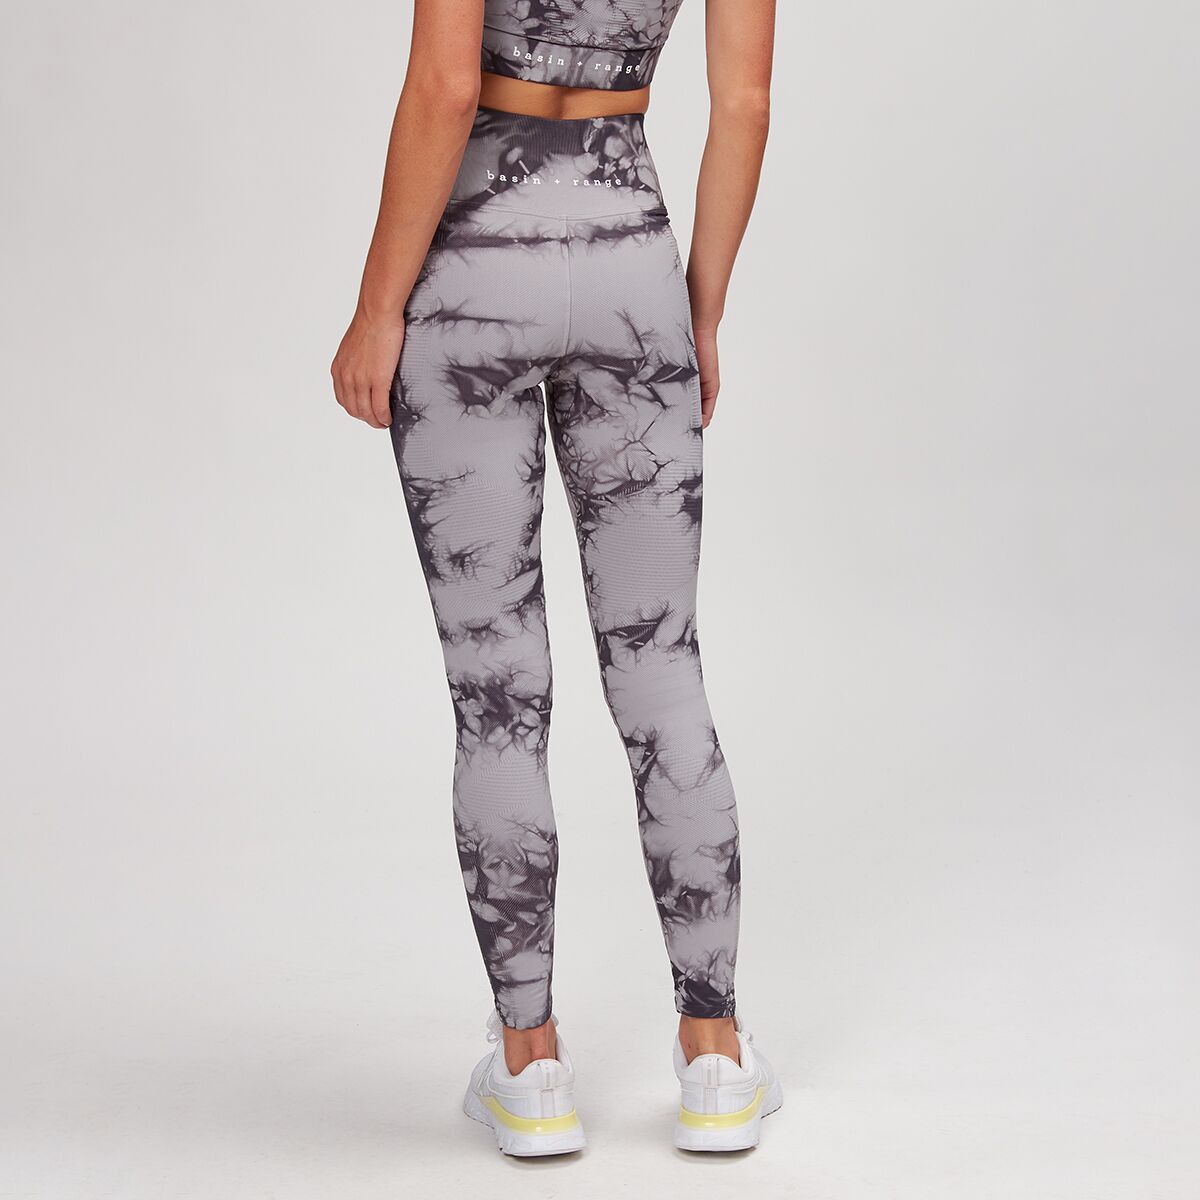 Basin and Range x Nux One By One Legging - Past Season - Women's